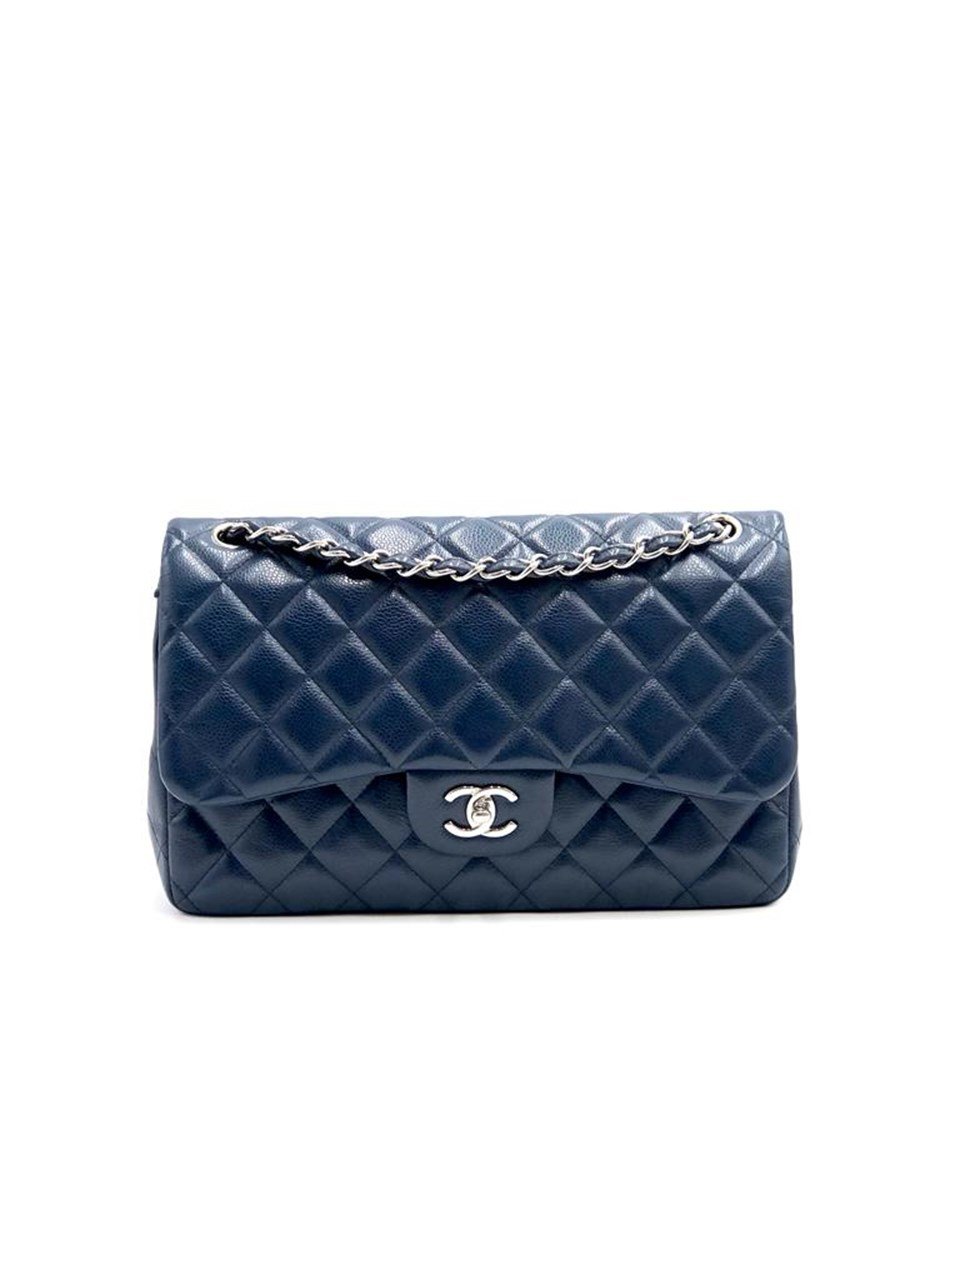 CHANEL Caviar Quilted Jumbo Double Flap Dark Grey, FASHIONPHILE